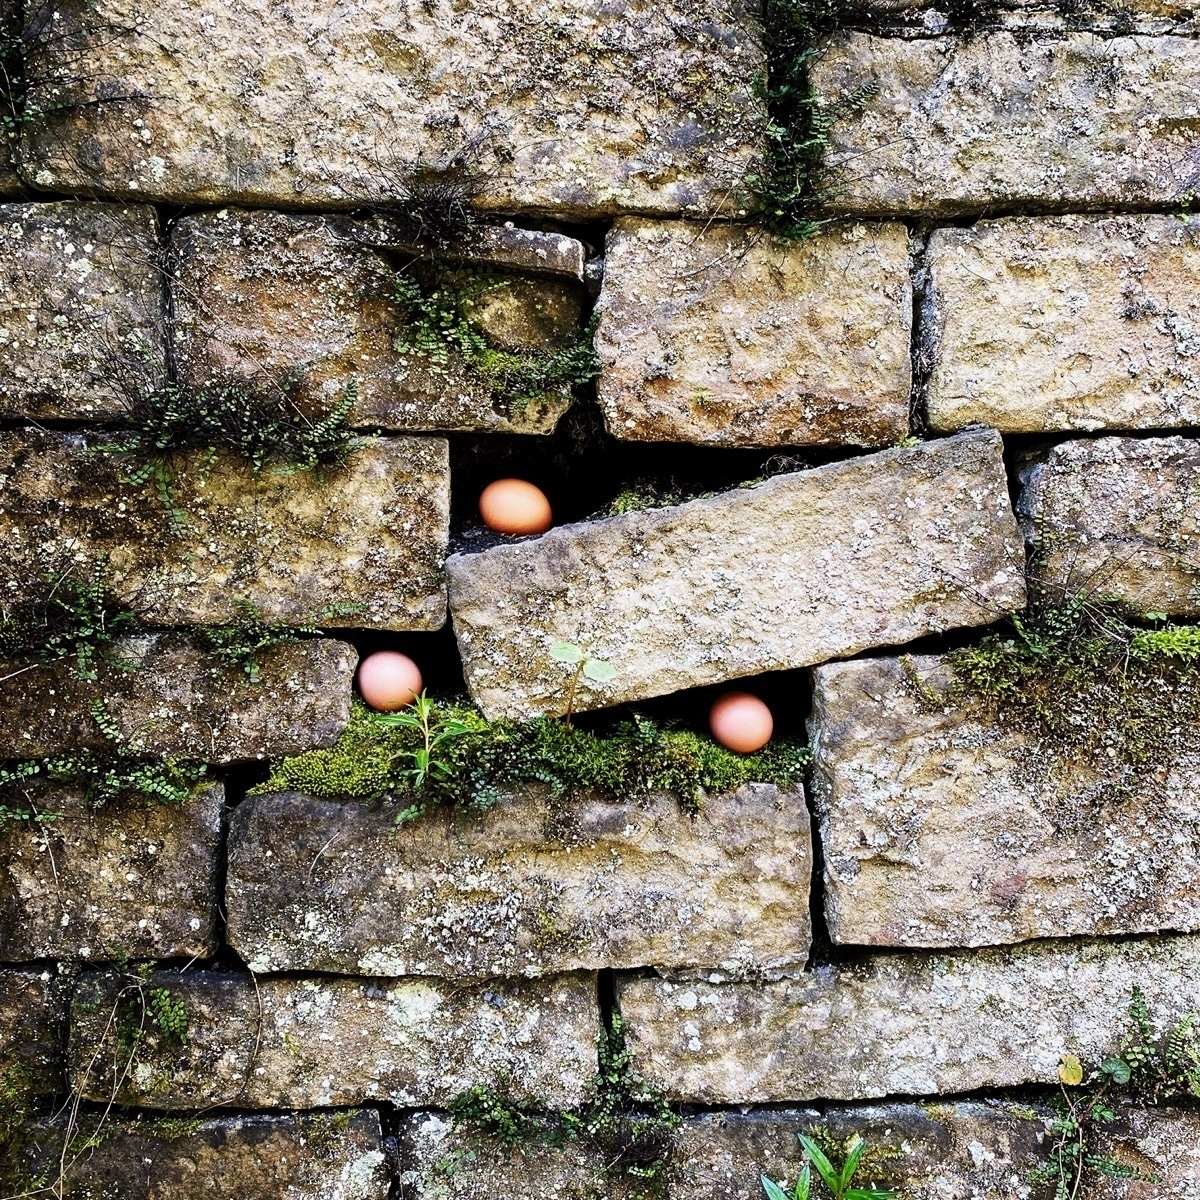 Three eggs secreted in the gaps in a brick wall